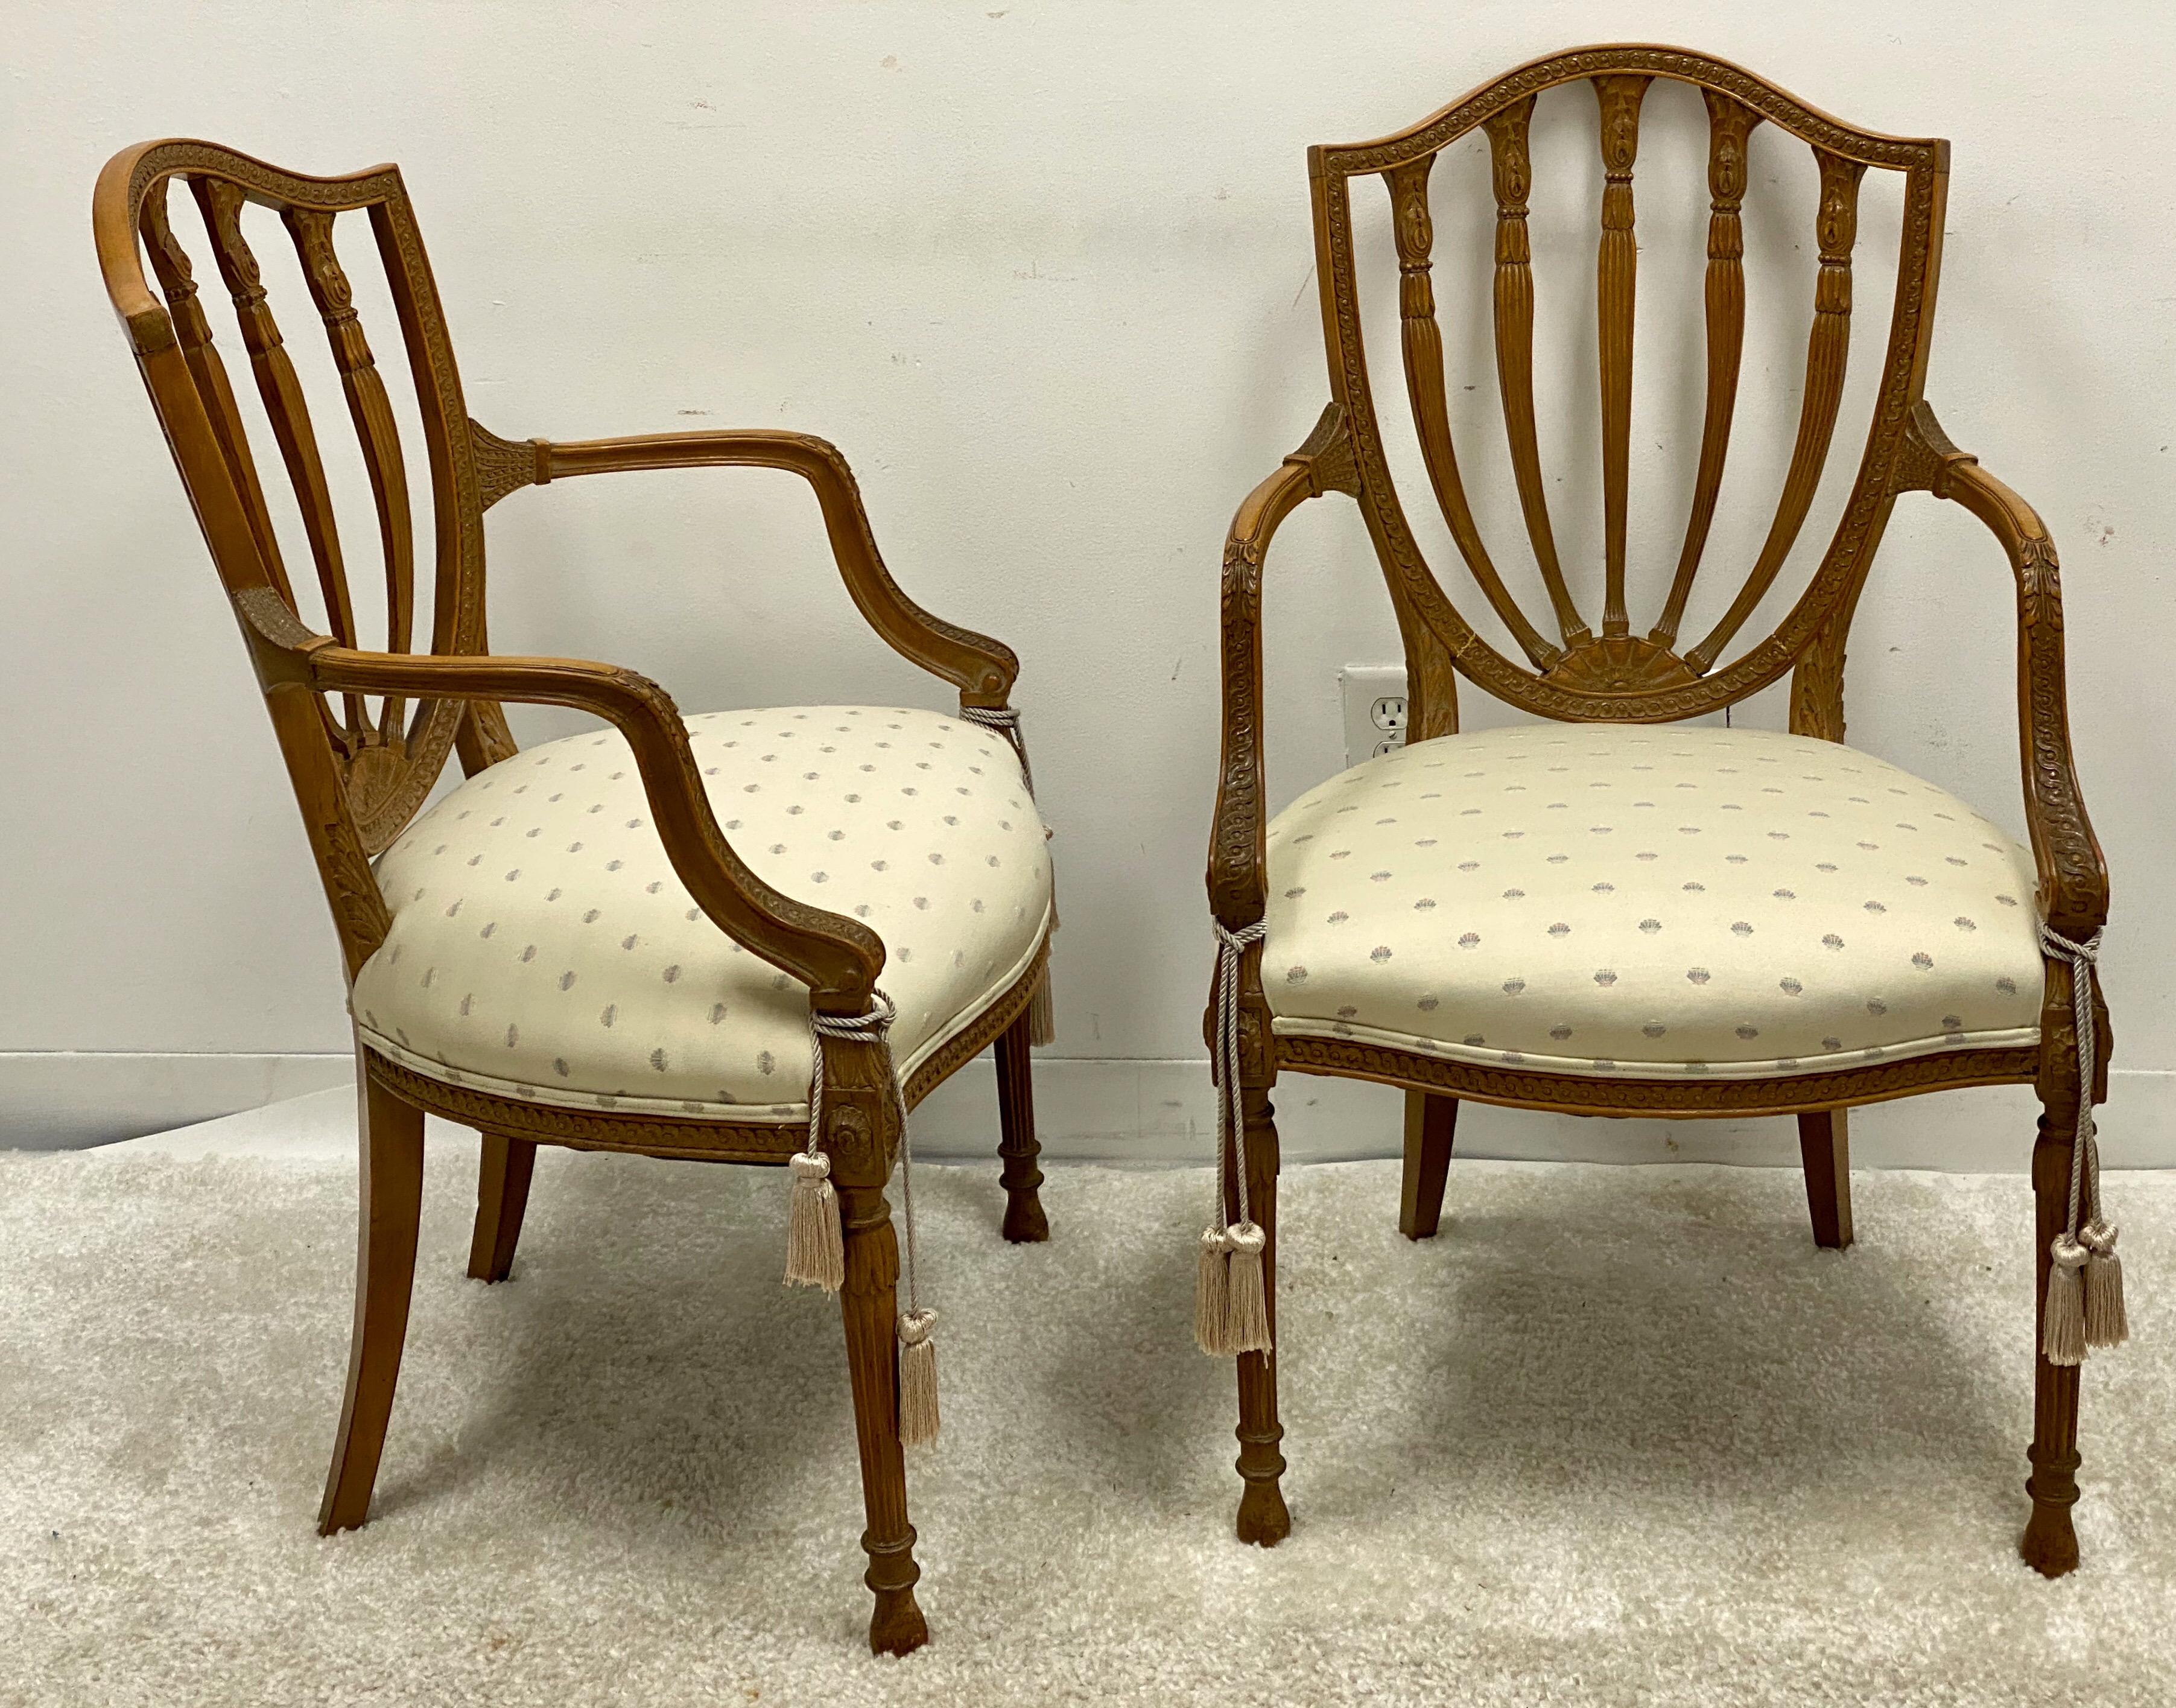 This is a pair of carved fruitwood Adam style shieldback chairs by Baker Furniture. They are marked and in very good condition. The upholstery is vintage but free of stains and tears.